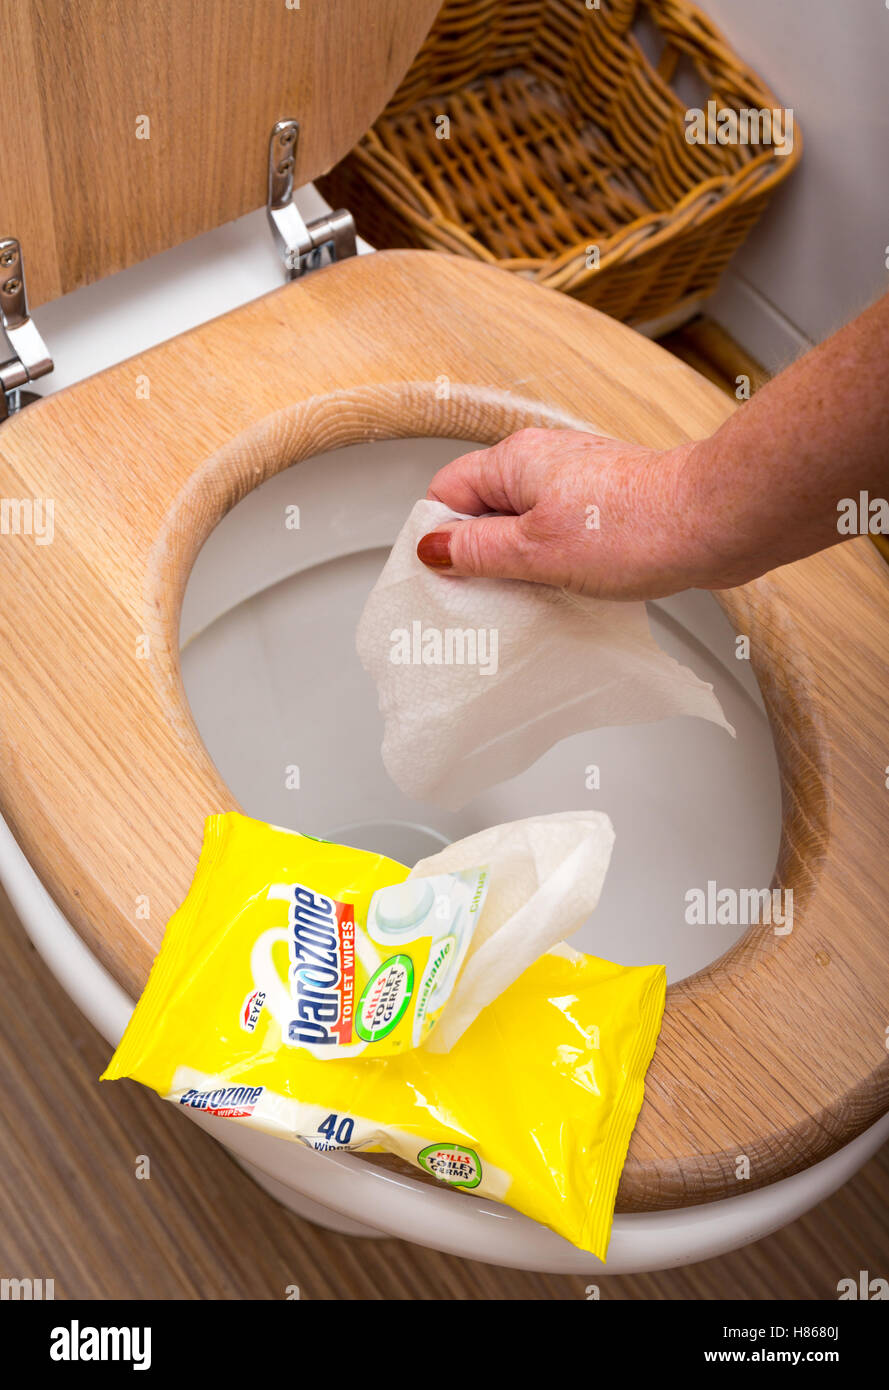 Wet Wipes used to clean the toilet before flushing them away Stock Photo